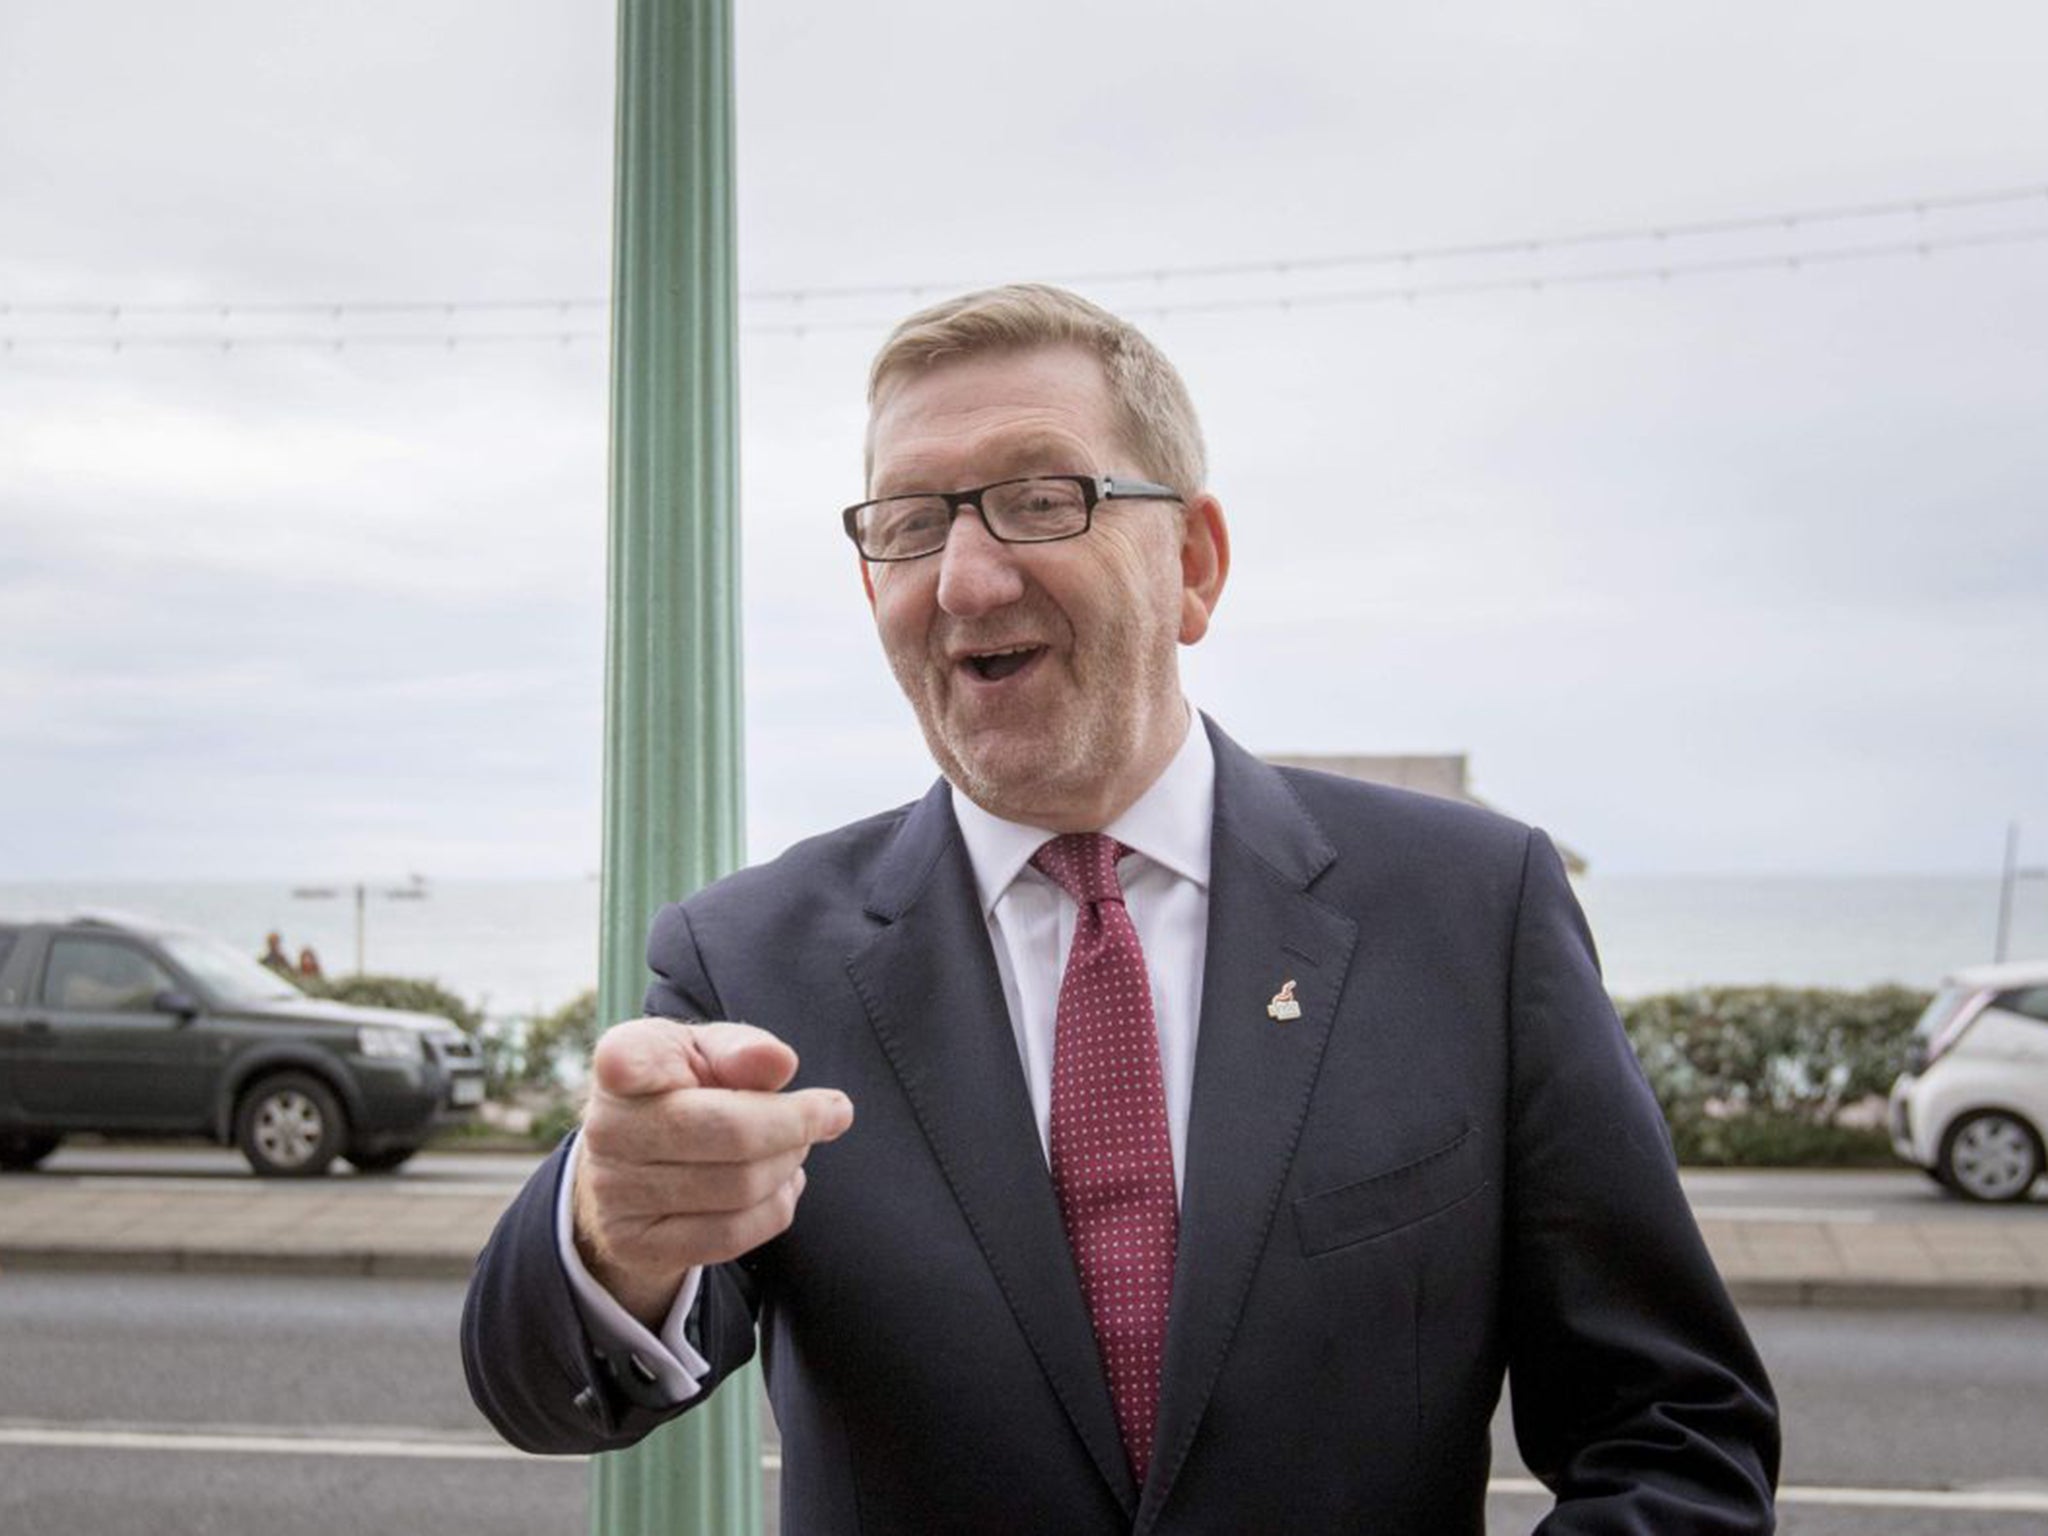 Trade unionists, such as Len McCluskey, are distrusted by two-thirds of those polled